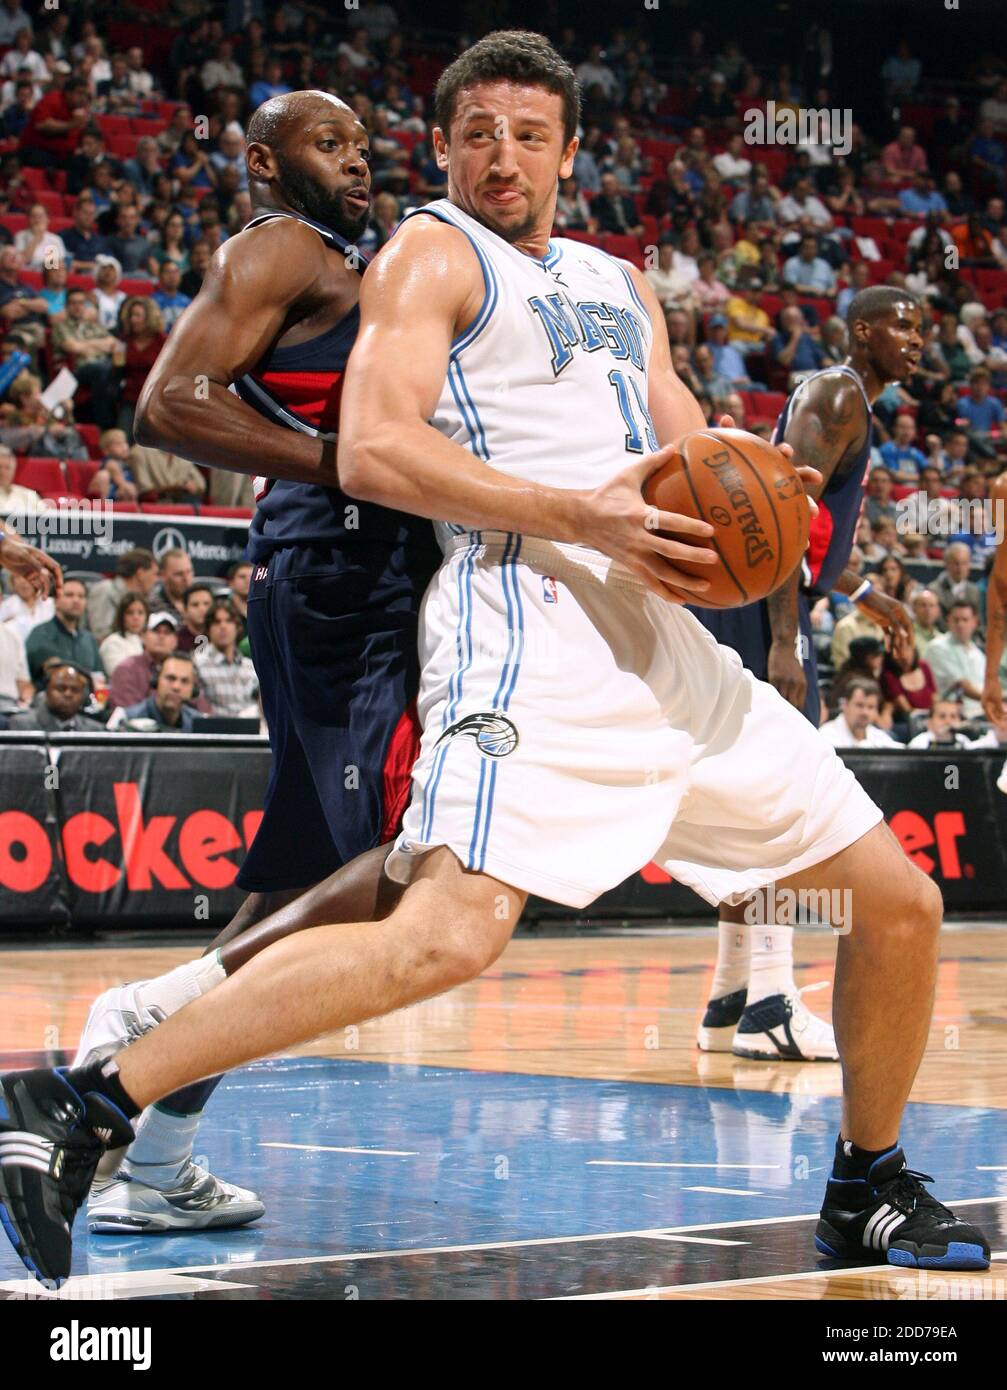 NO FILM, NO VIDEO, NO TV, NO DOCUMENTARY - Orlando Magic forward Hedo Turkoglu posts-up against Atlanta Hawks guard Anthony Johnson (8) during game action at Amway Arena in Orlando, FL, USA on December 10, 2007.The Hawks defeated the Magic, 98-87 Photo by Gary W. Green/MCT/ABACAPRESS.COM Stock Photo